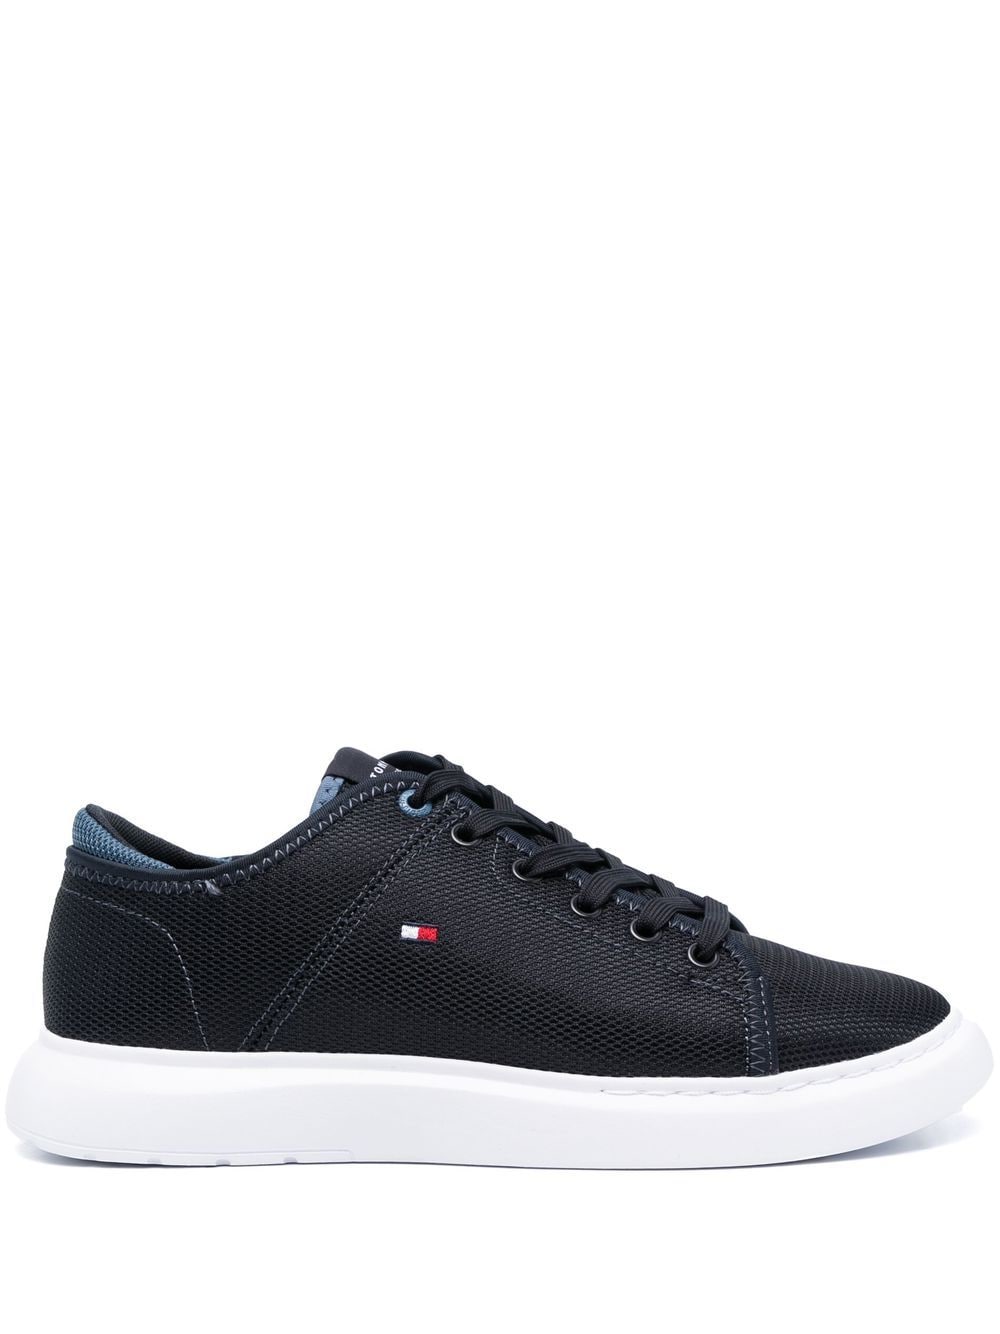 Tommy Hilfiger embroidered logo mesh low-top sneakers - Blue von Tommy Hilfiger